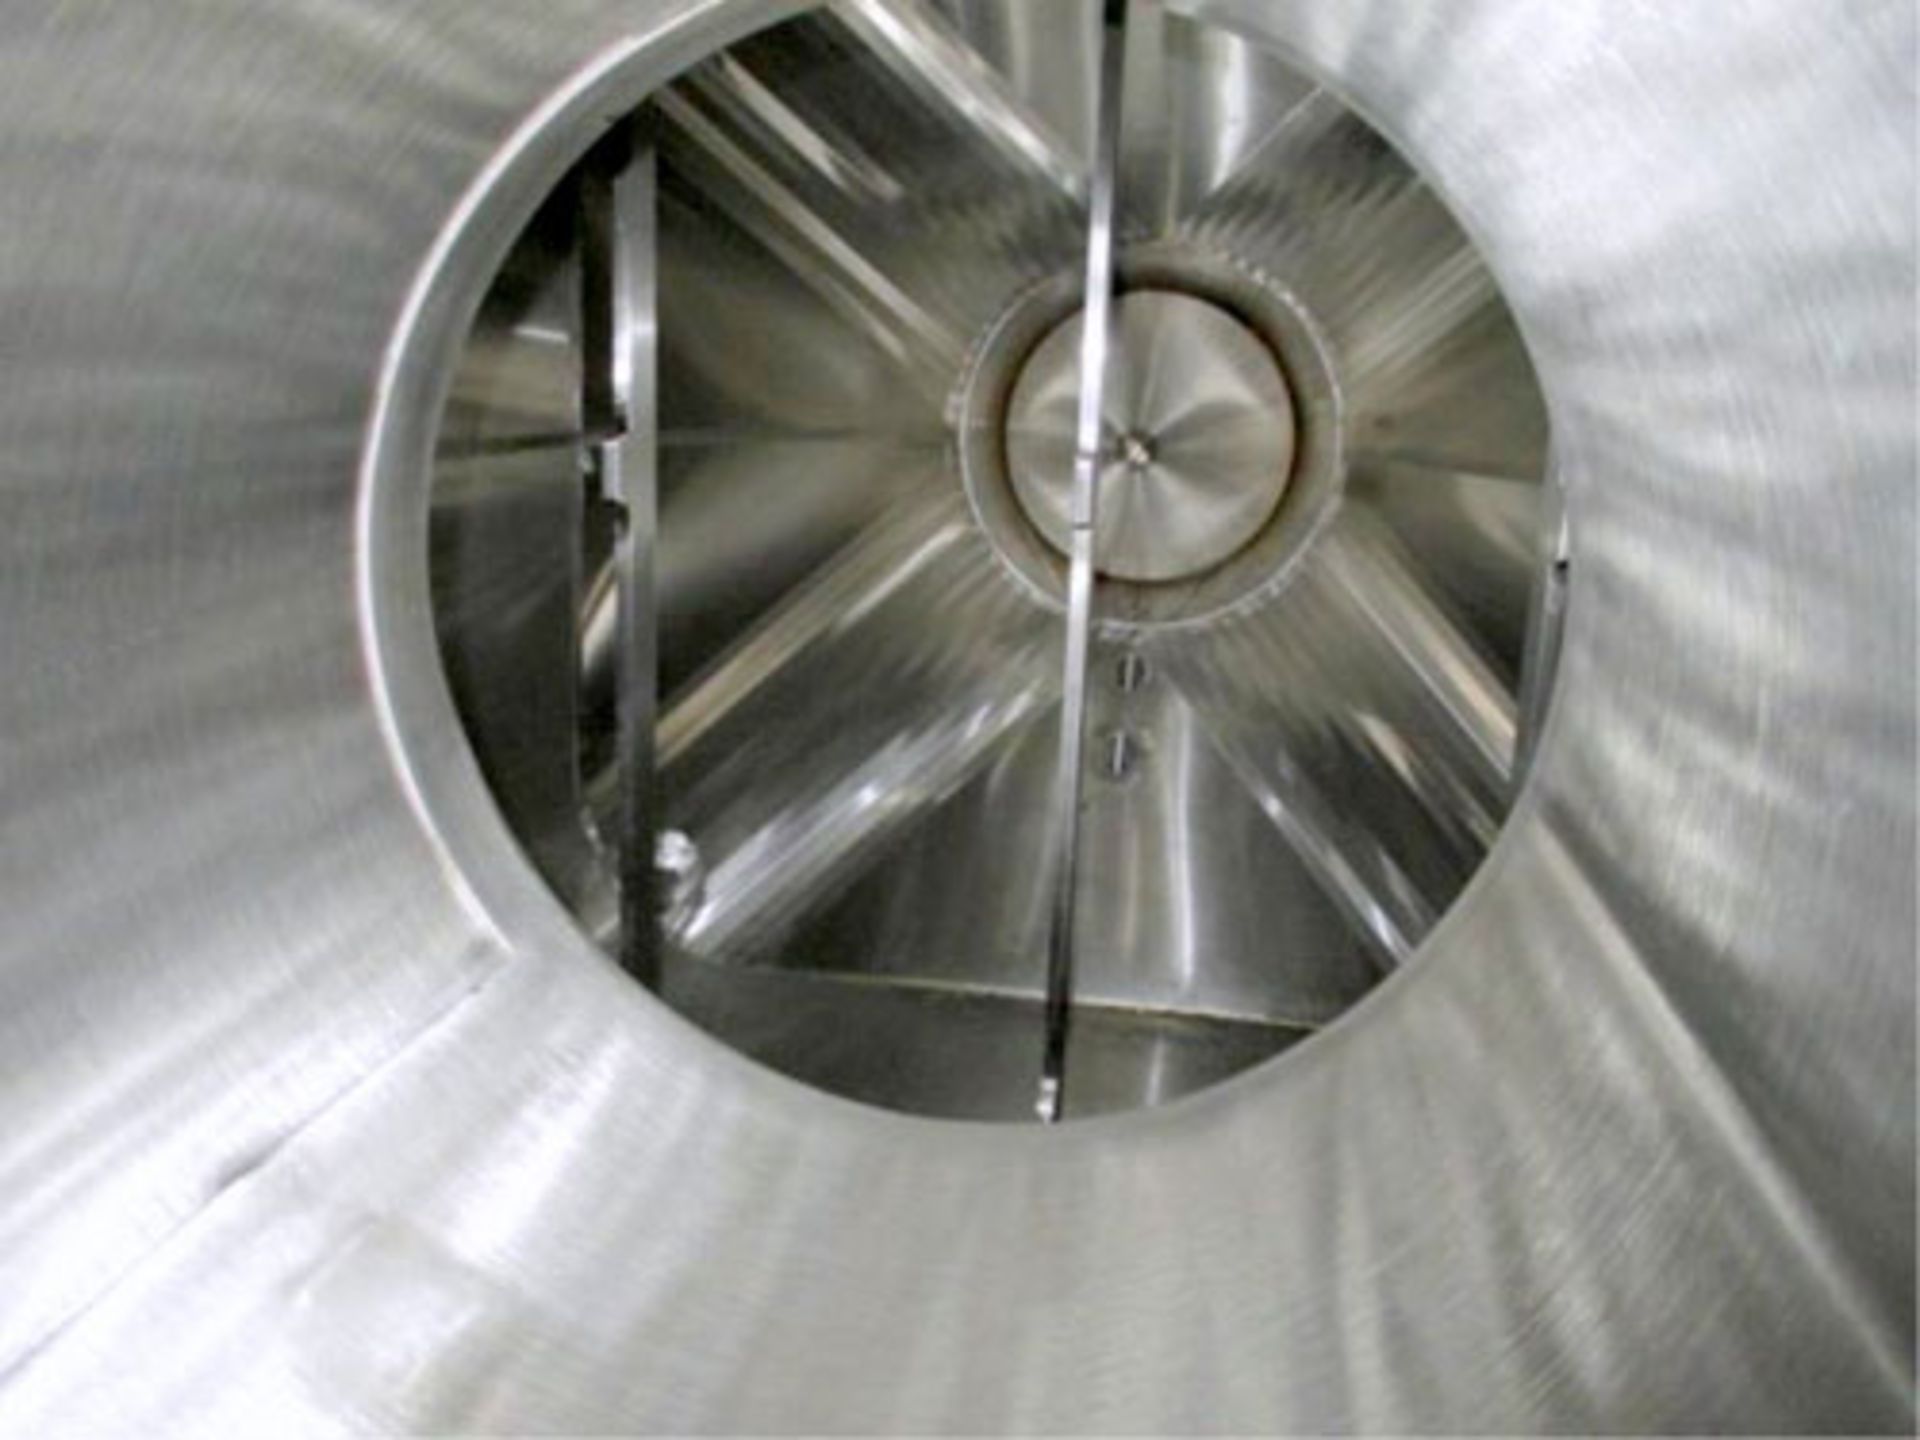 Matcon Storage Bin, Stainless Steel Construction. Cone bottom with valve discharge. - Image 4 of 4